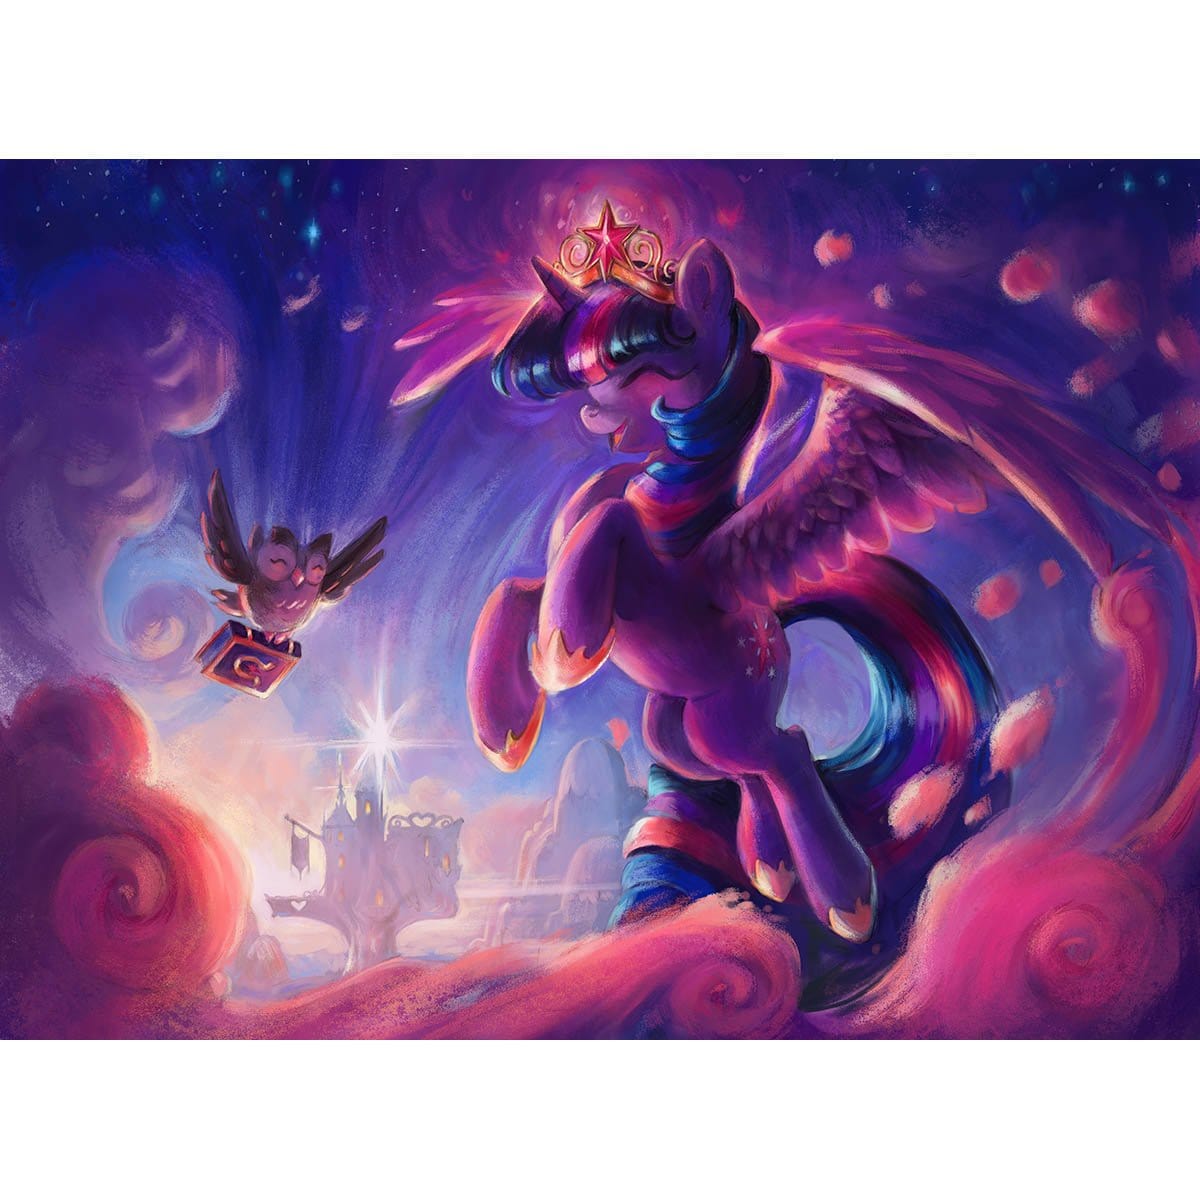 Princess Twilight Sparkle Print - Print - Original Magic Art - Accessories for Magic the Gathering and other card games